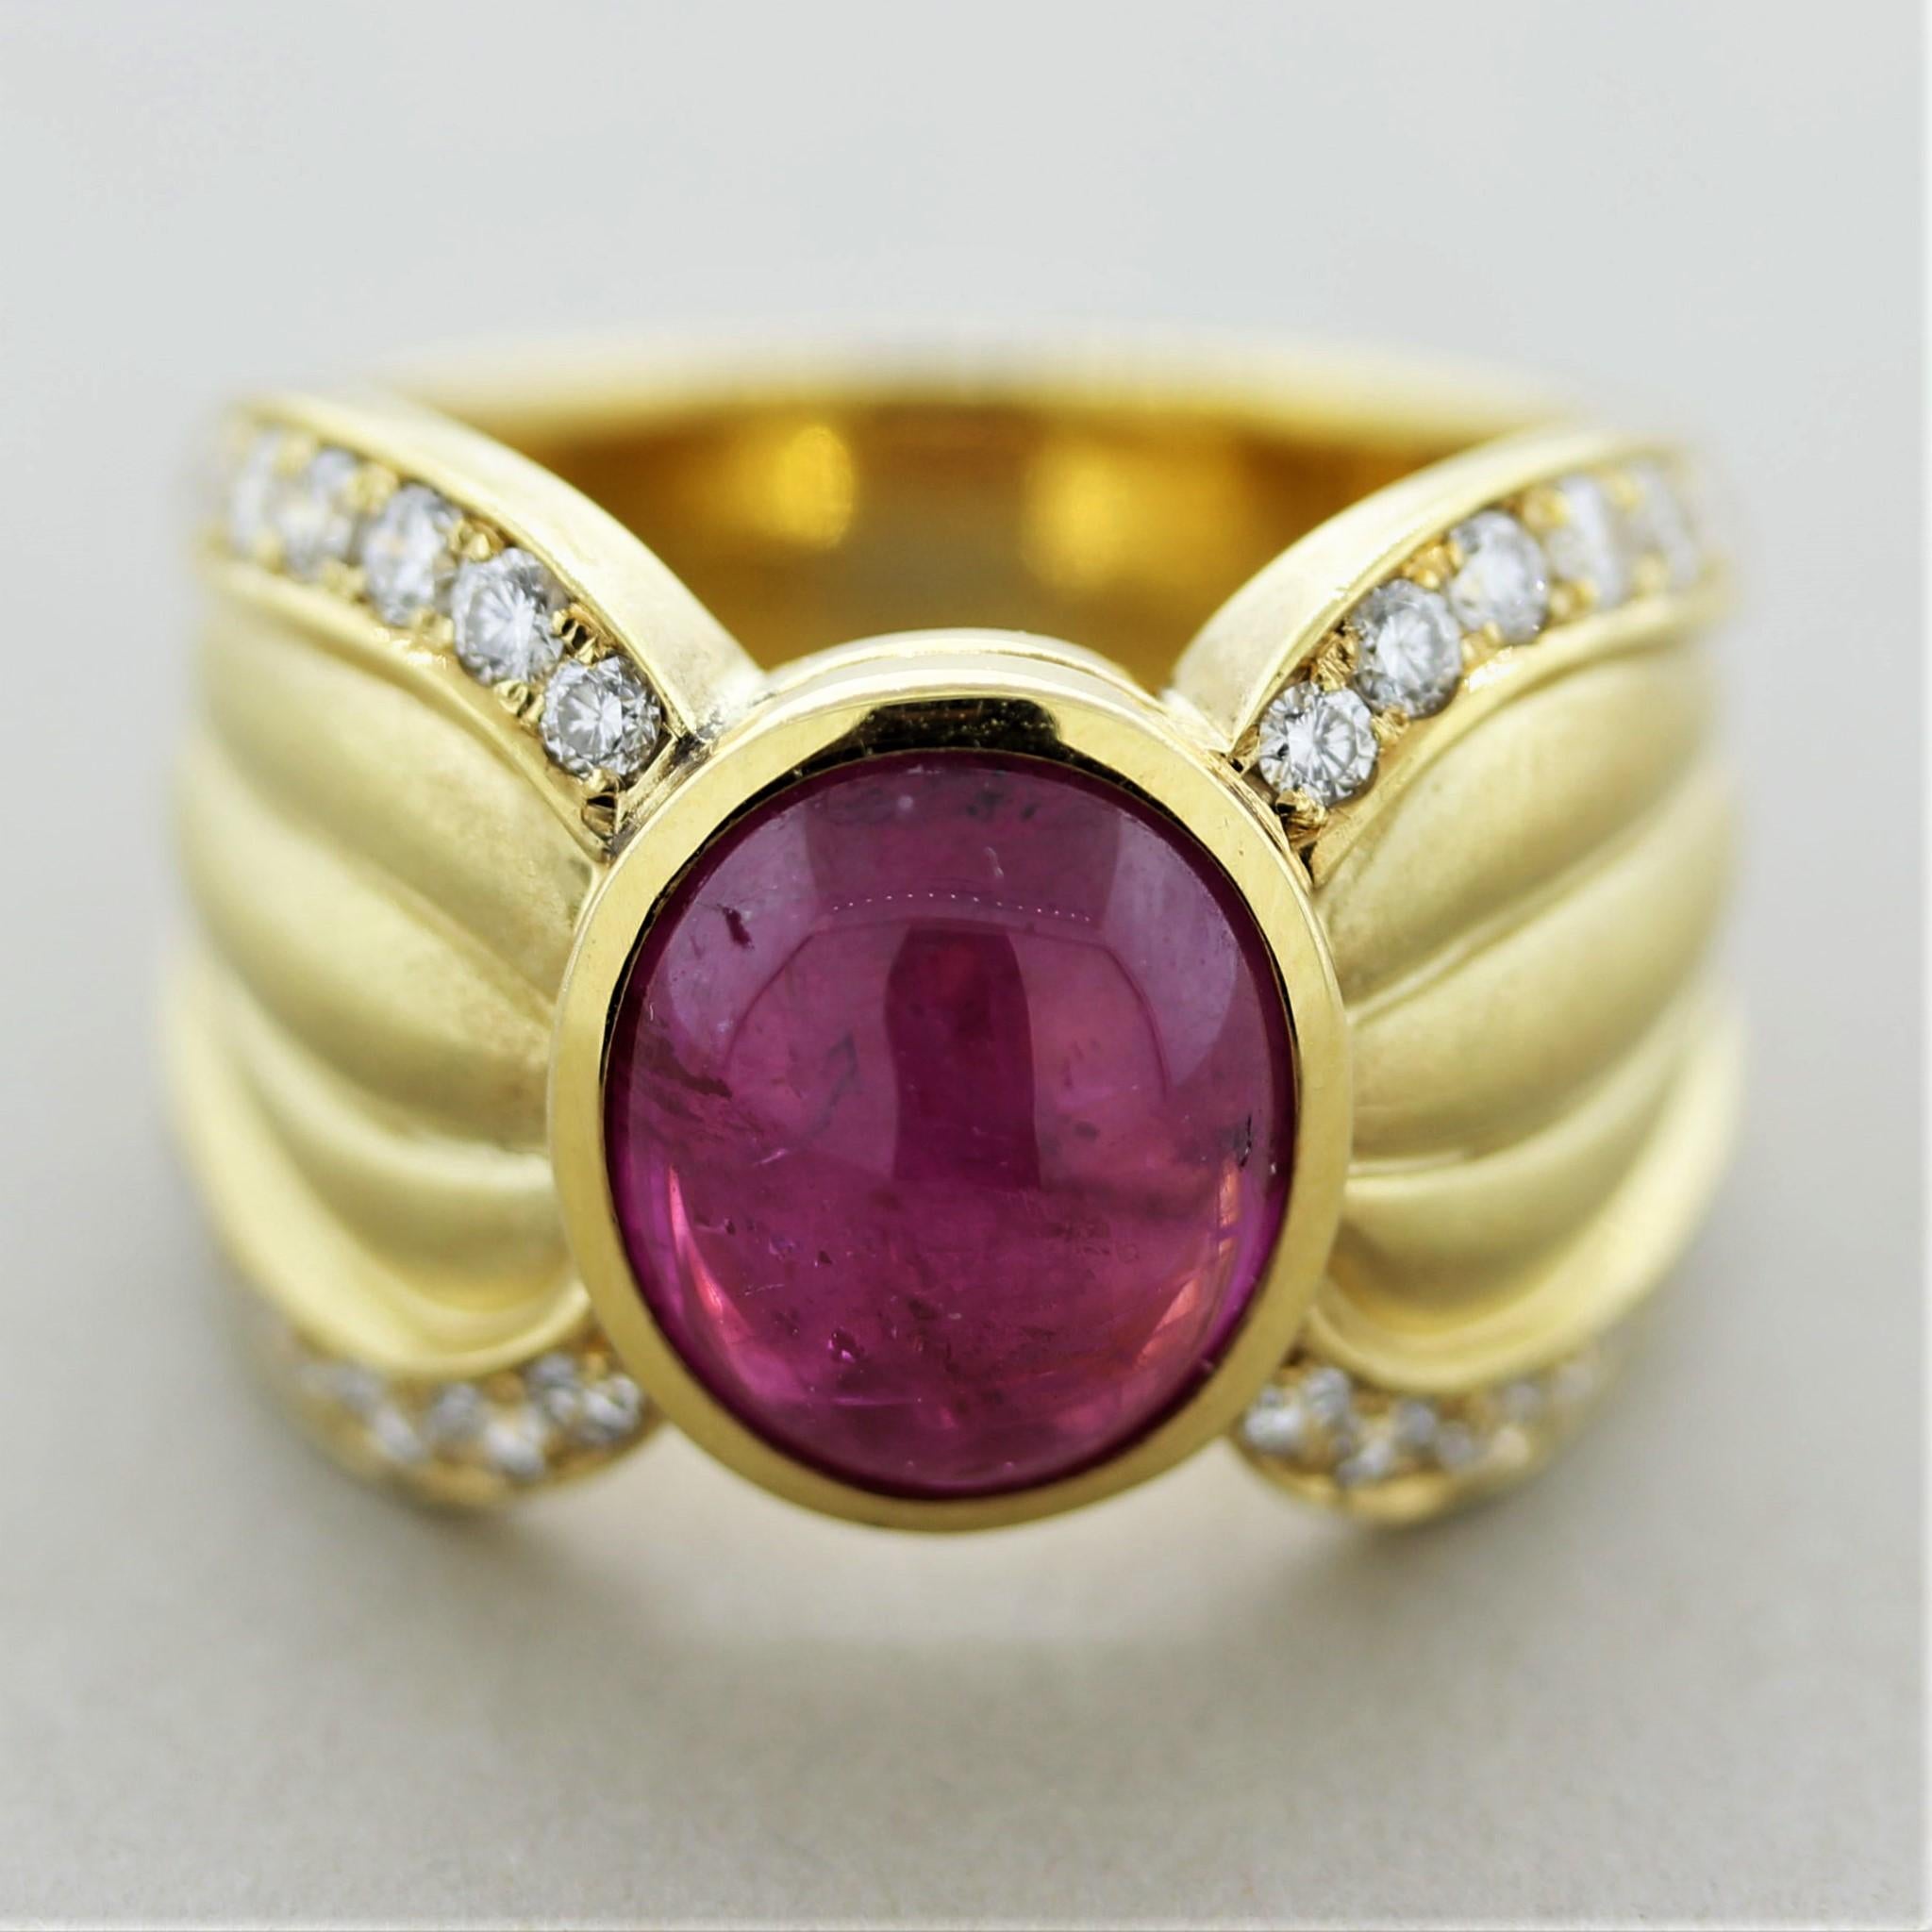 A work of art and piece of jewelry. This lovely ring features a 4.90 carat cabochon ruby with a bright and rich red color. It is accented by 0.86 carats of round brilliant-cut diamonds which are set on the borders of the ring adding sparkle and